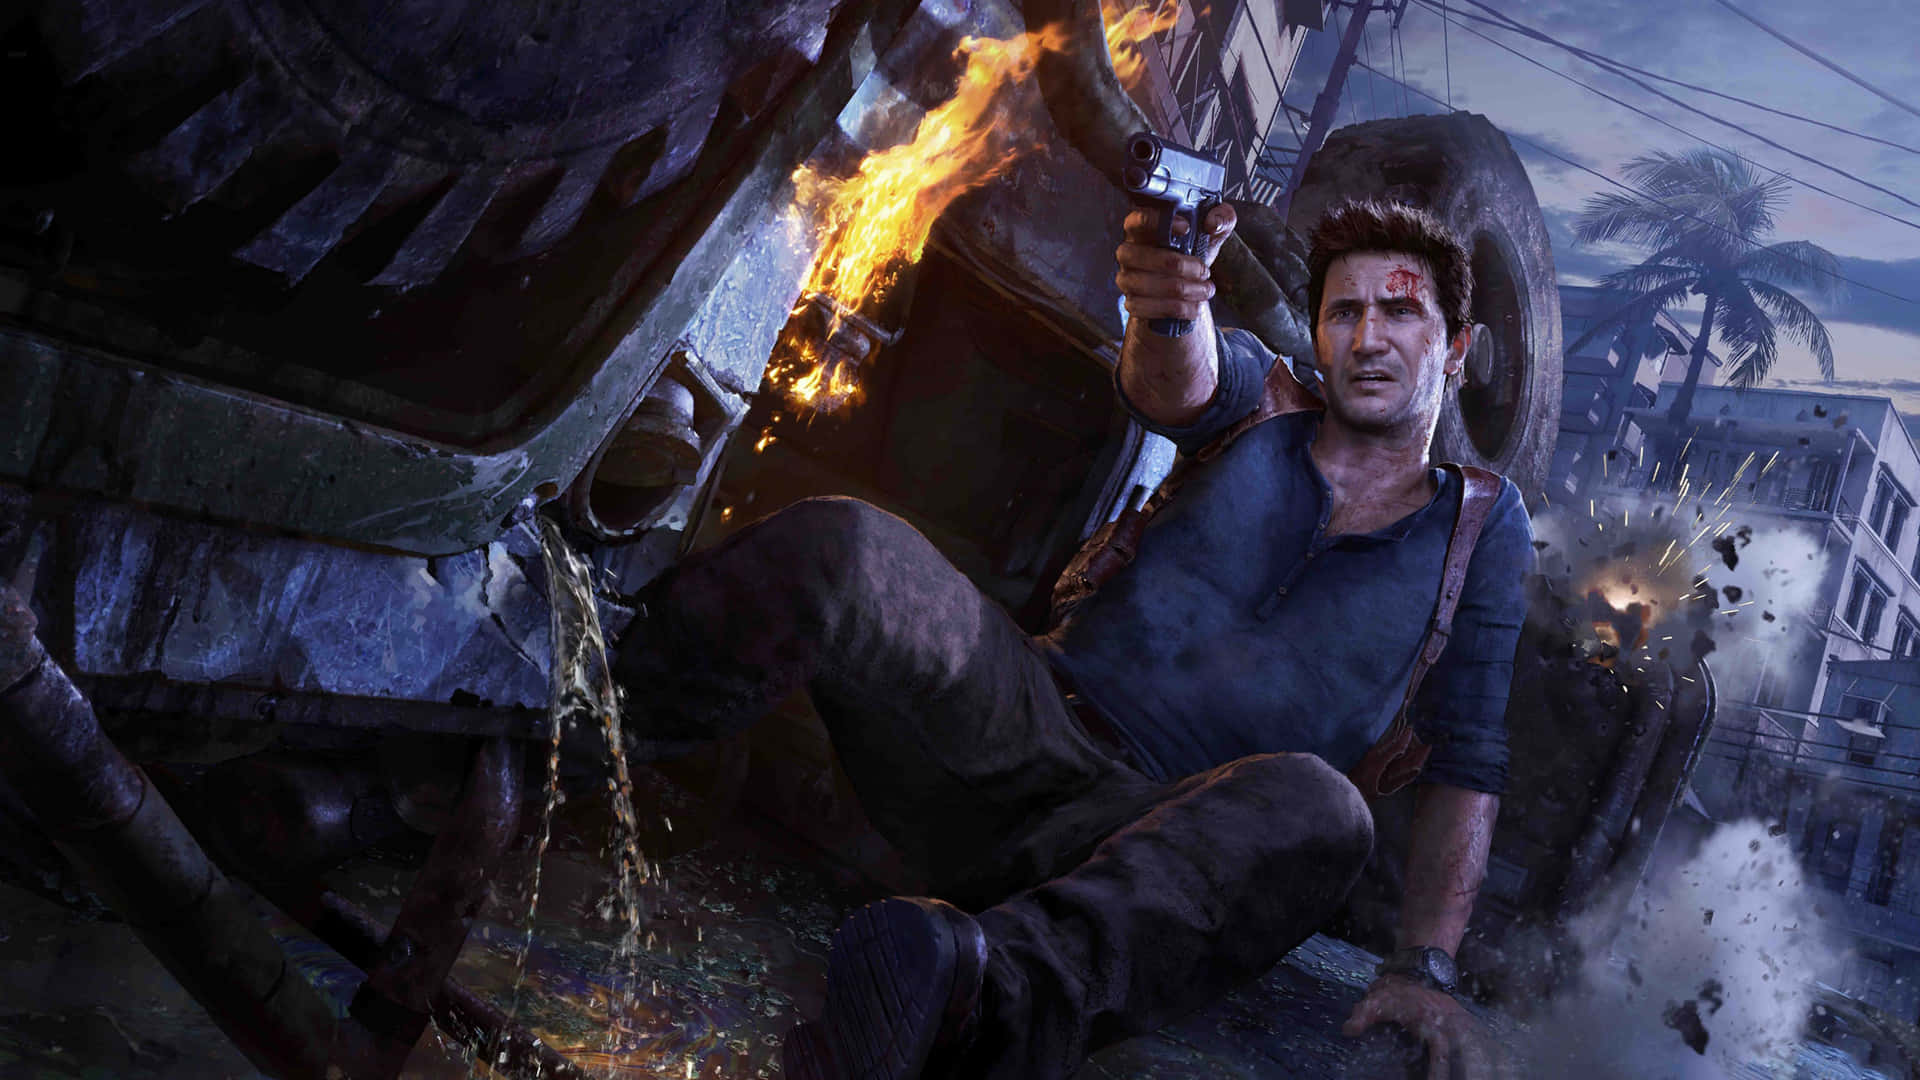 The Last Of Us Hd Wallpapers Background, Uncharted Picture Background Image  And Wallpaper for Free Download